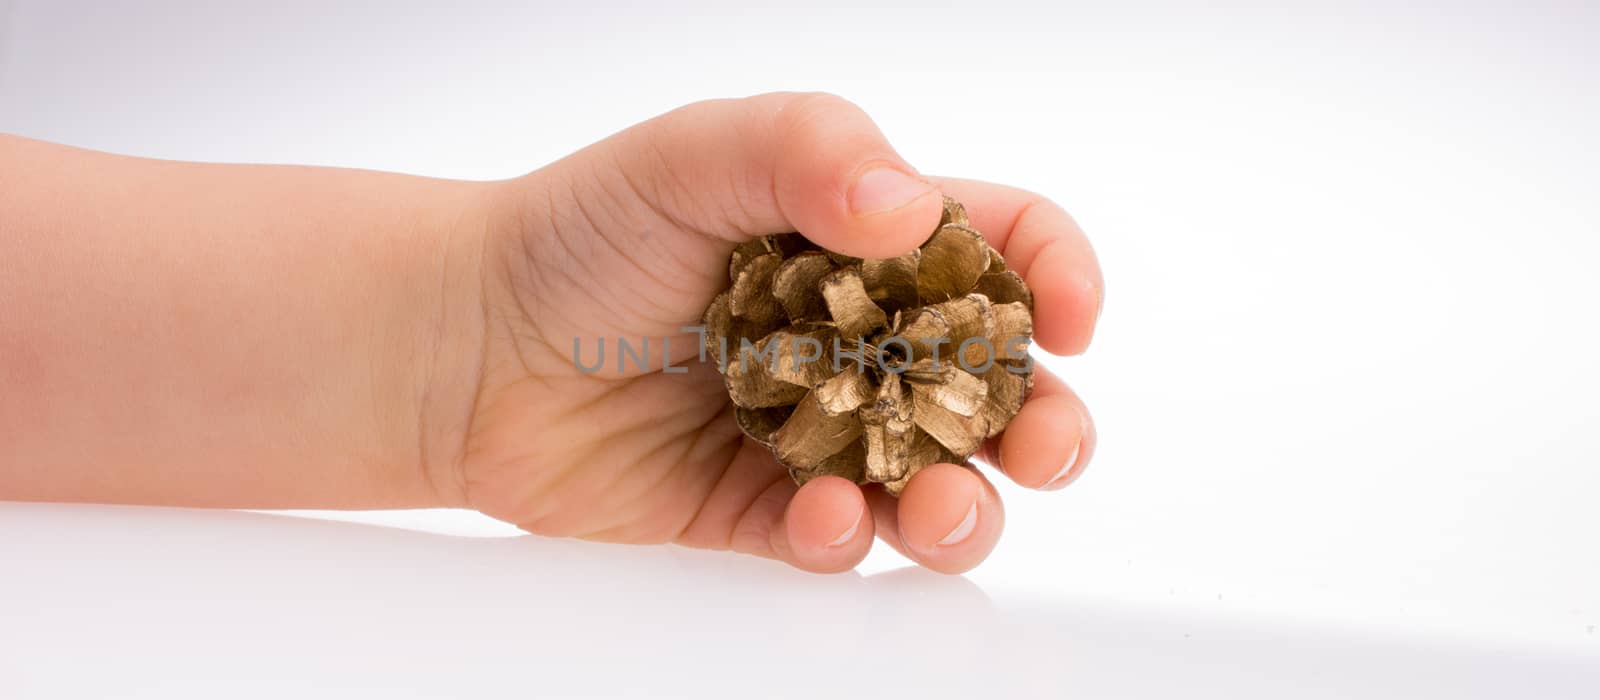 Pine cone in hand on a white background by berkay